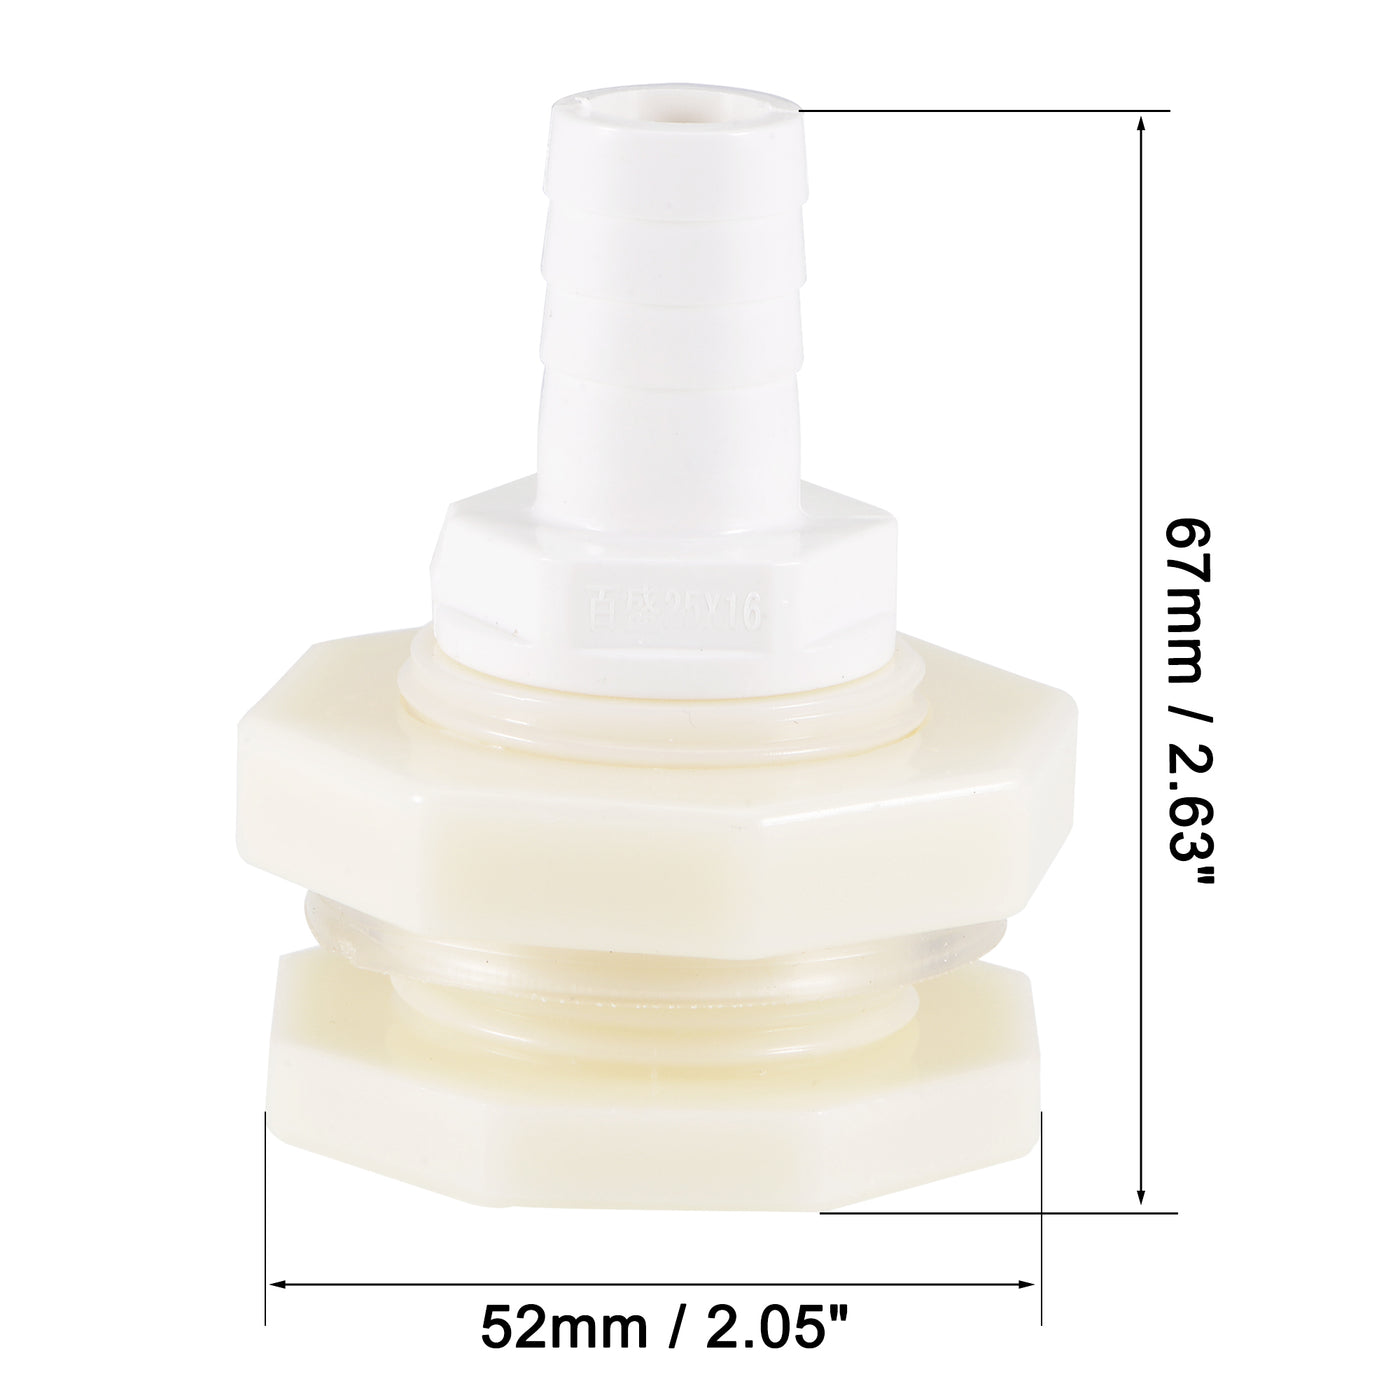 uxcell Uxcell Bulkhead Fitting Adapter 16mm Barbed x G3/4 Female ABS White for Aquariums, Water Tanks, Tubs, Pools 4Pcs